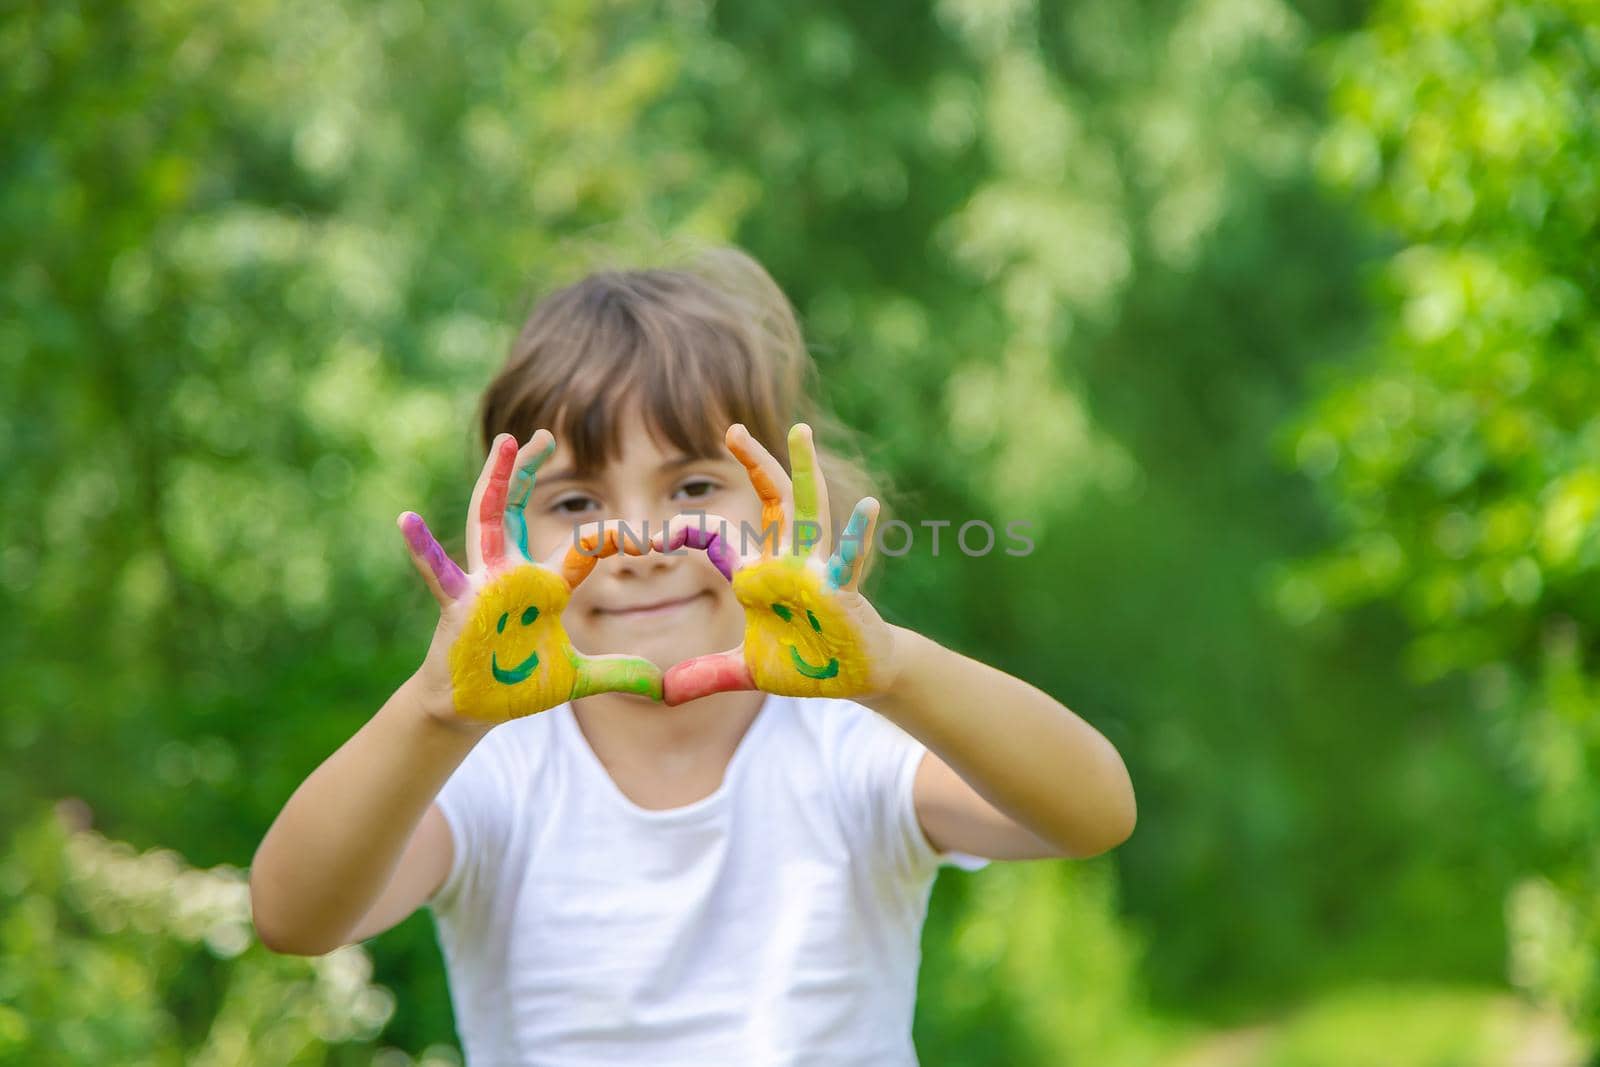 Child hands in paints a smile. Selective focus.